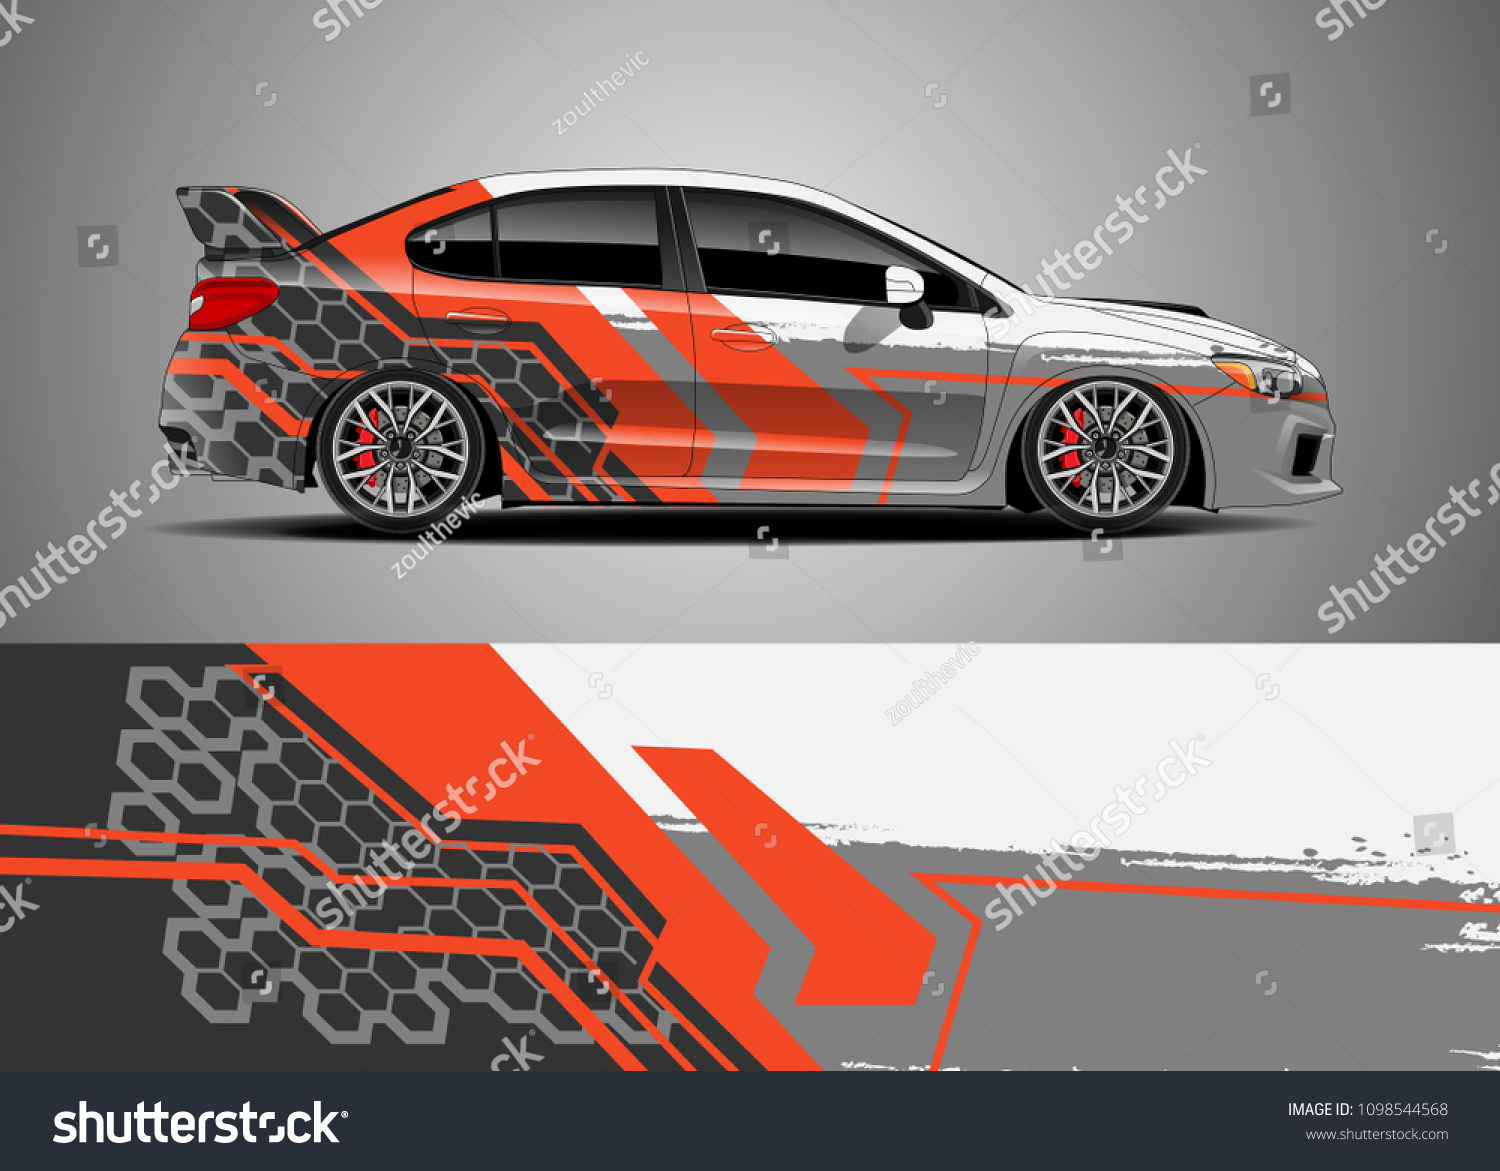 Car Decal Sticker Graphic Vinyl Stock Vector (Royalty Free) 1098544568